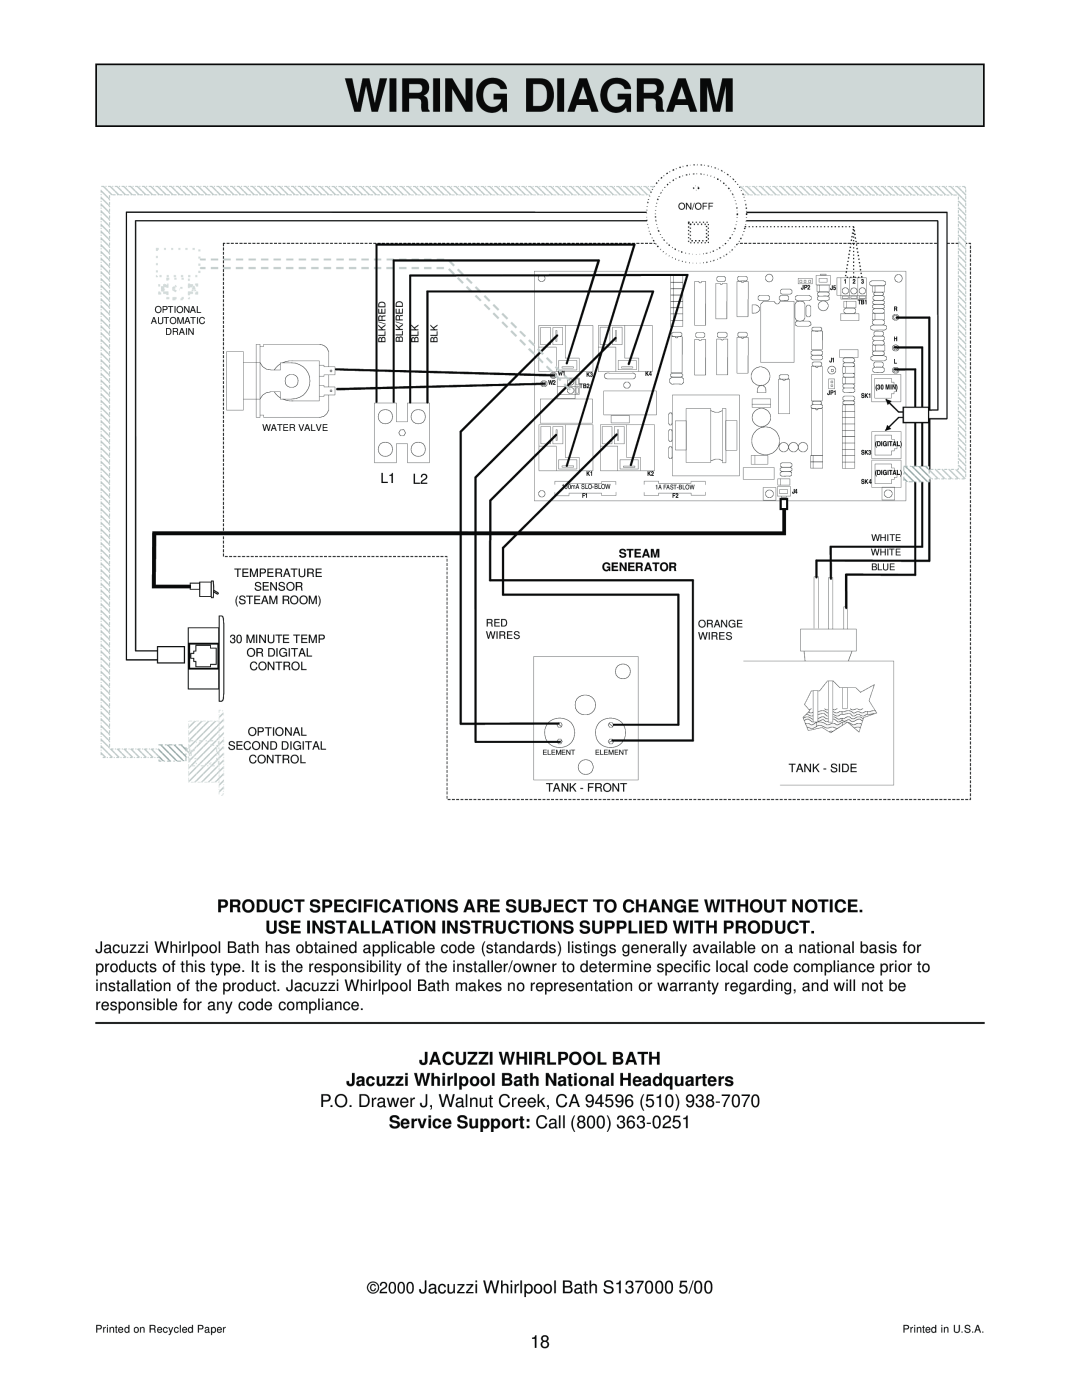 Jacuzzi SteamPro manual Wiring Diagram, Product Specifications Are Subject To Change Without Notice 